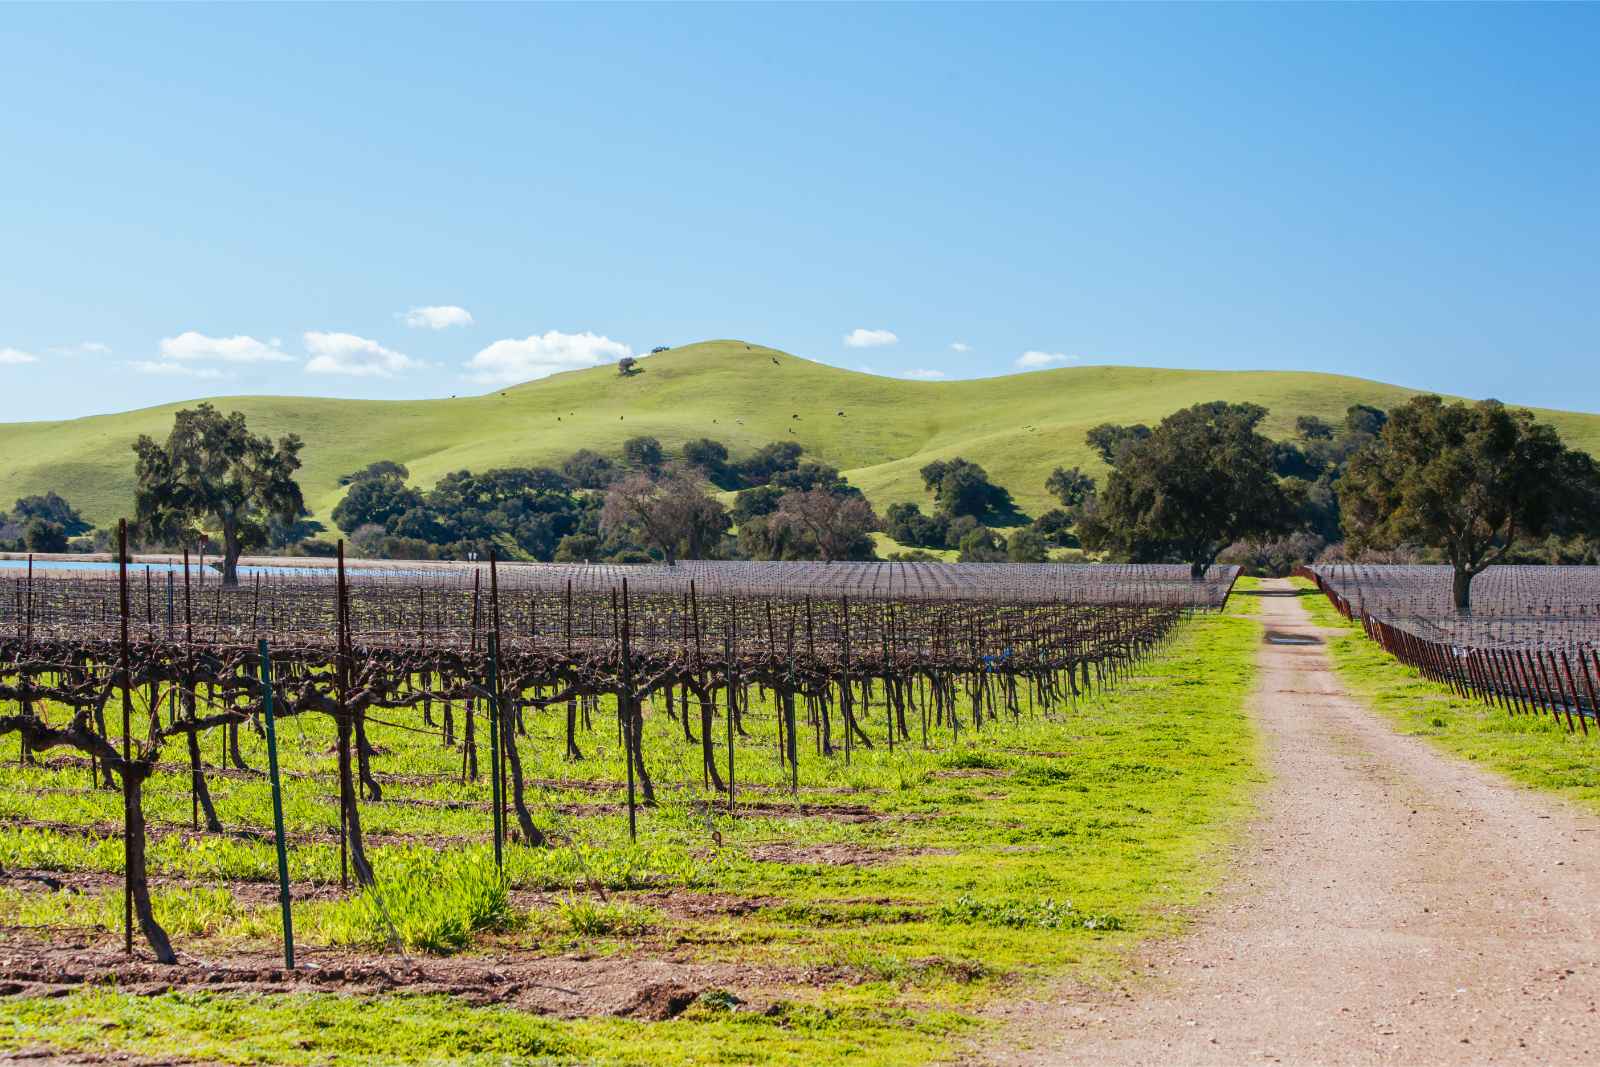 Best Things to Do in Southern California Santa Ynez Valley